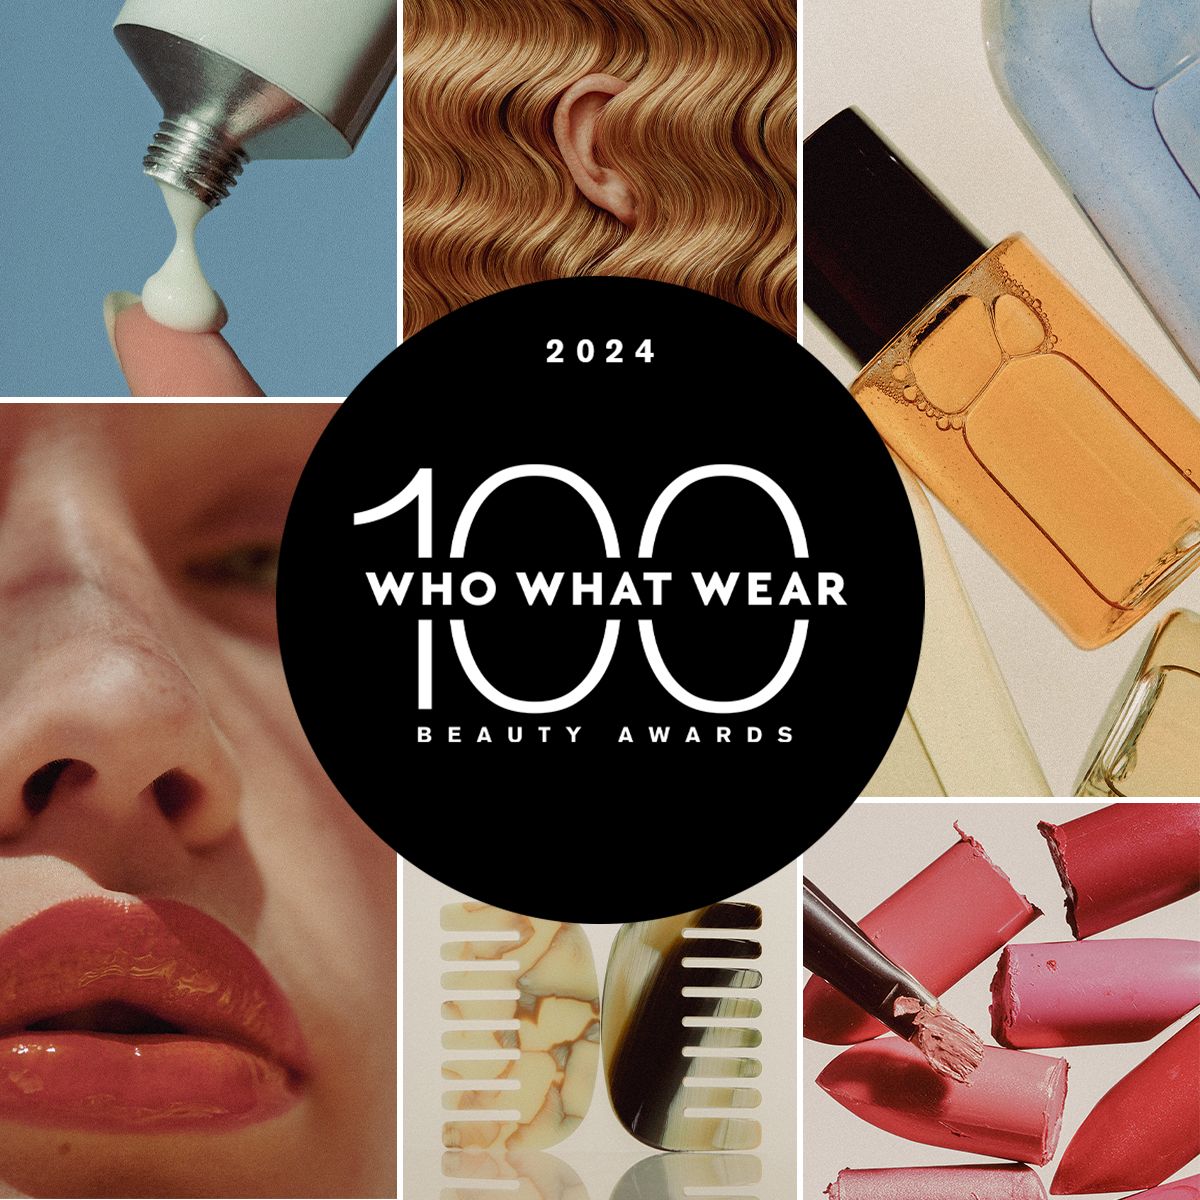 The Who What Wear 100 Beauty Awards 2024